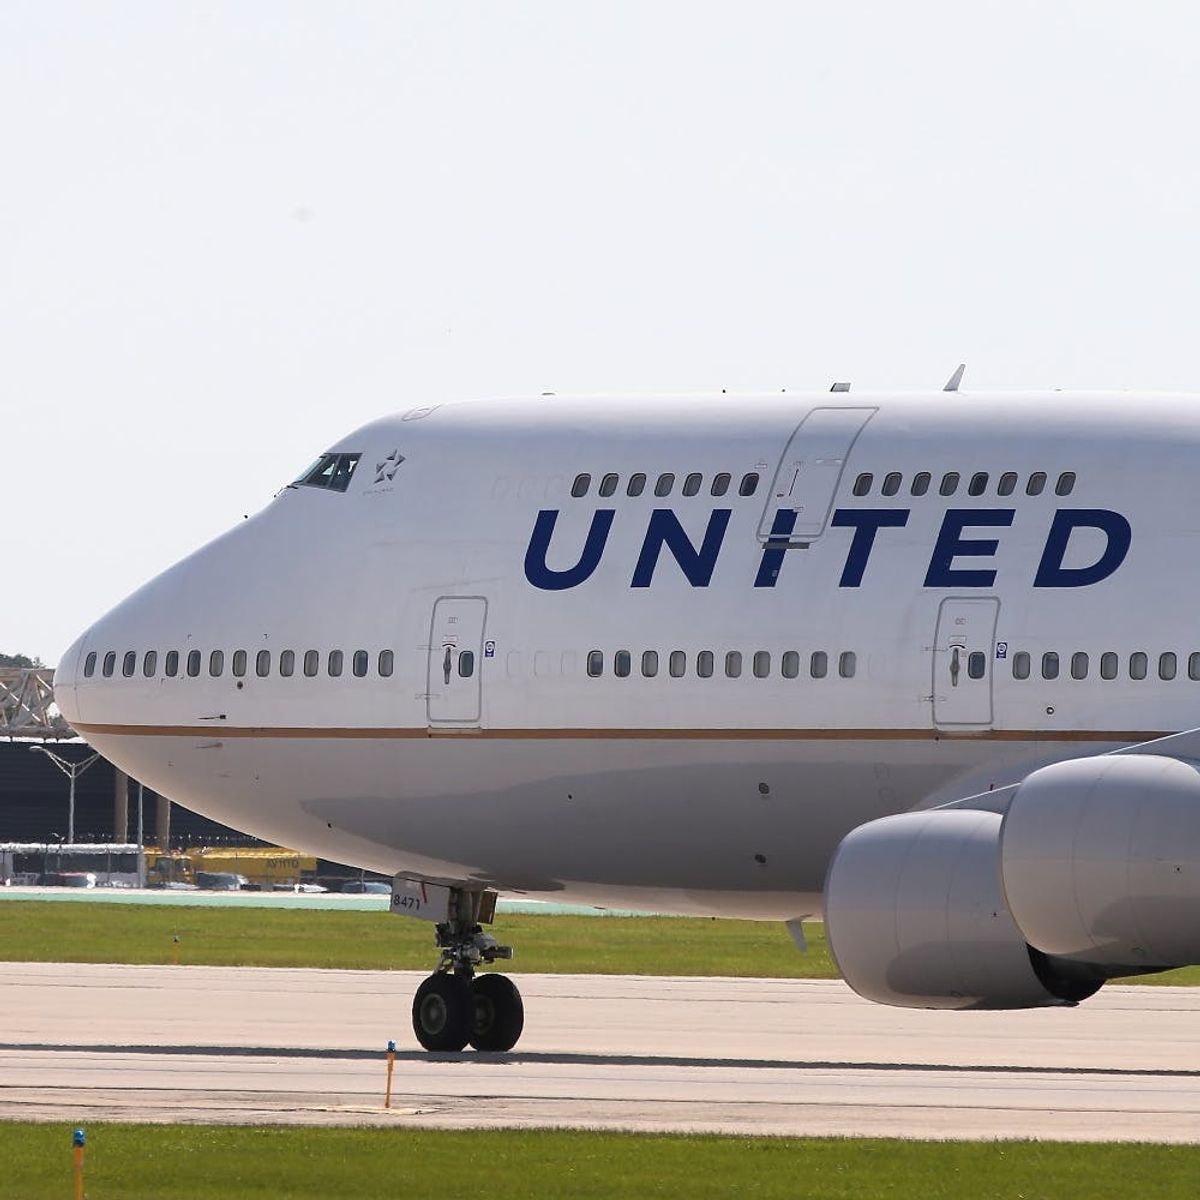 Twitter Has Mixed Feelings About Who’s to Blame in United’s Latest Passenger Scandal